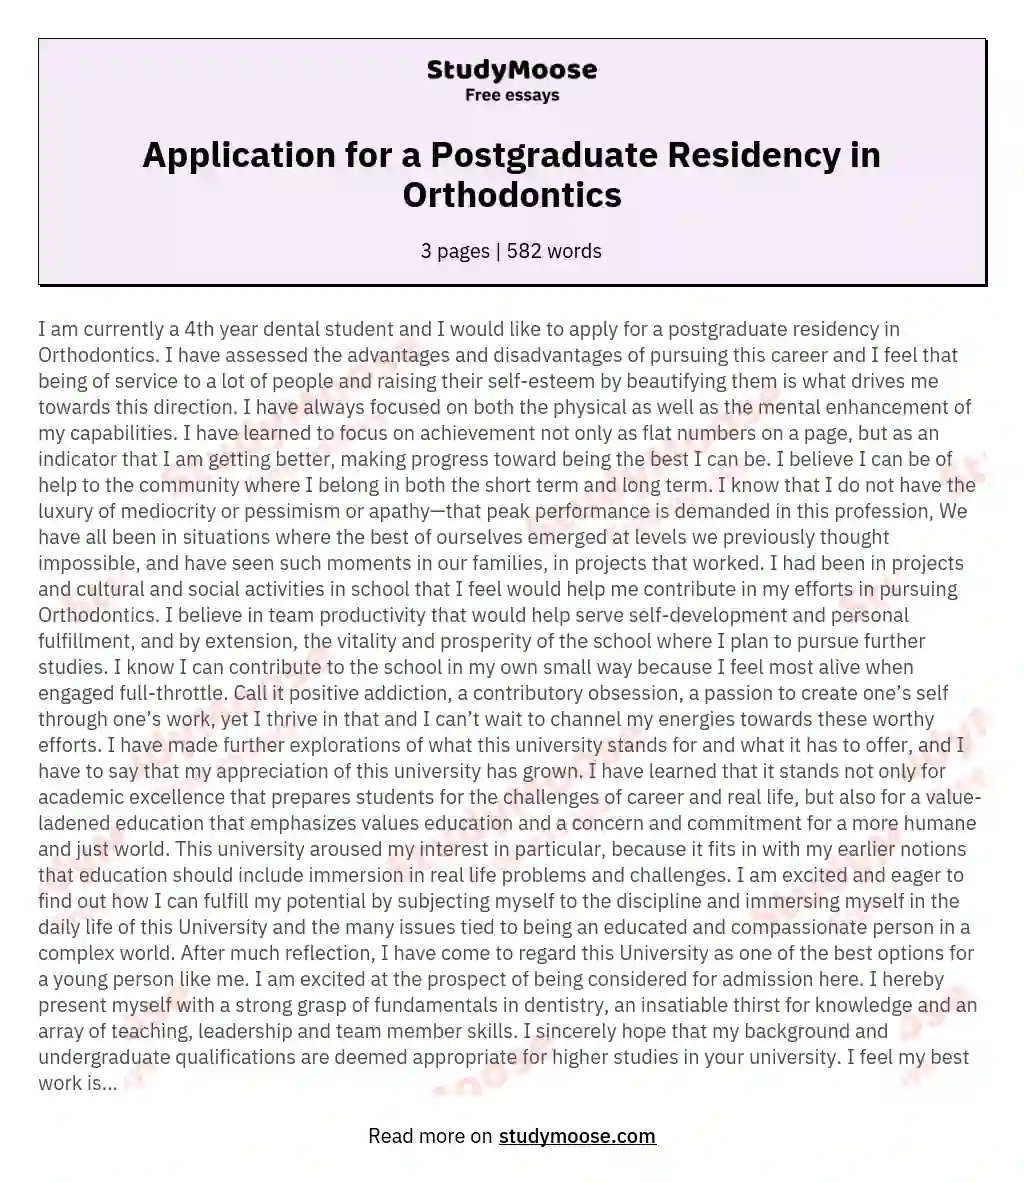 Application for a Postgraduate Residency in Orthodontics essay